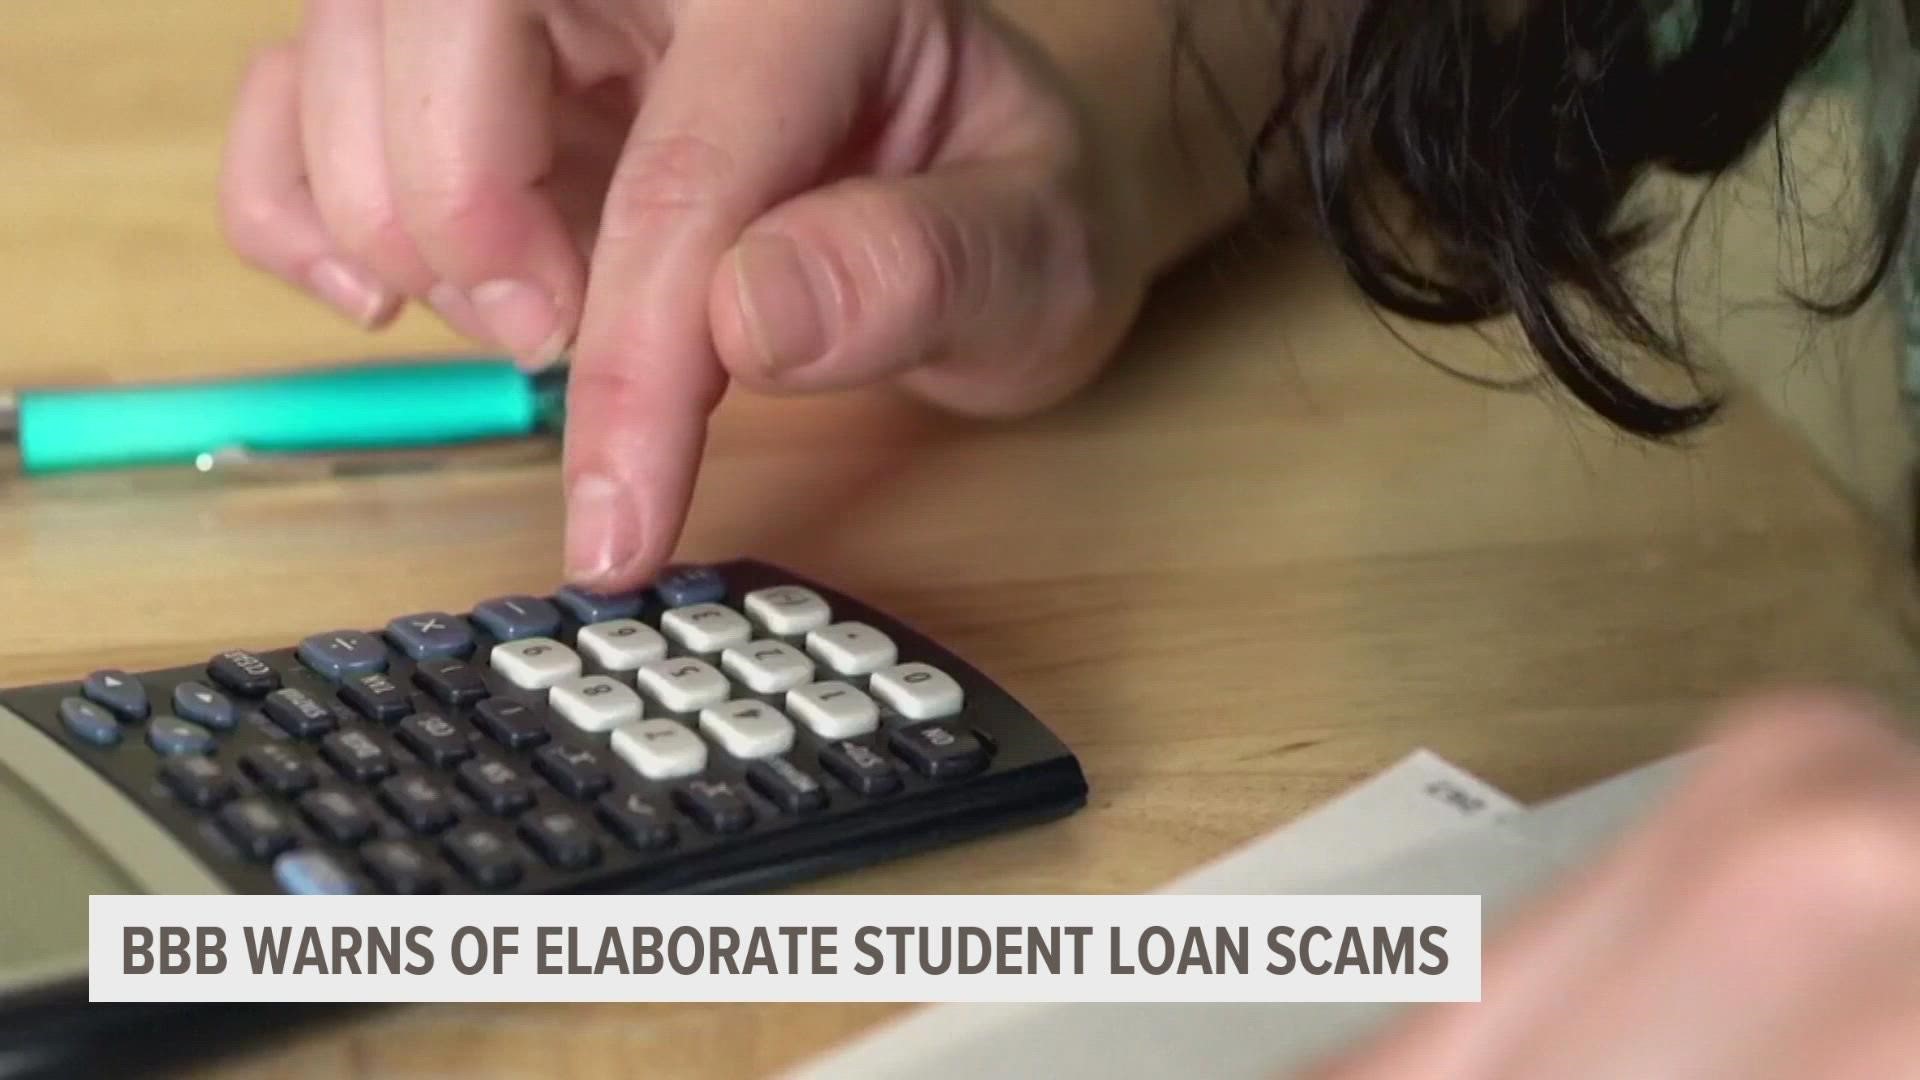 The Iowa Attorney General's Office and Better Business Bureau are warning people to stay aware of scams relating to student loan forgiveness.